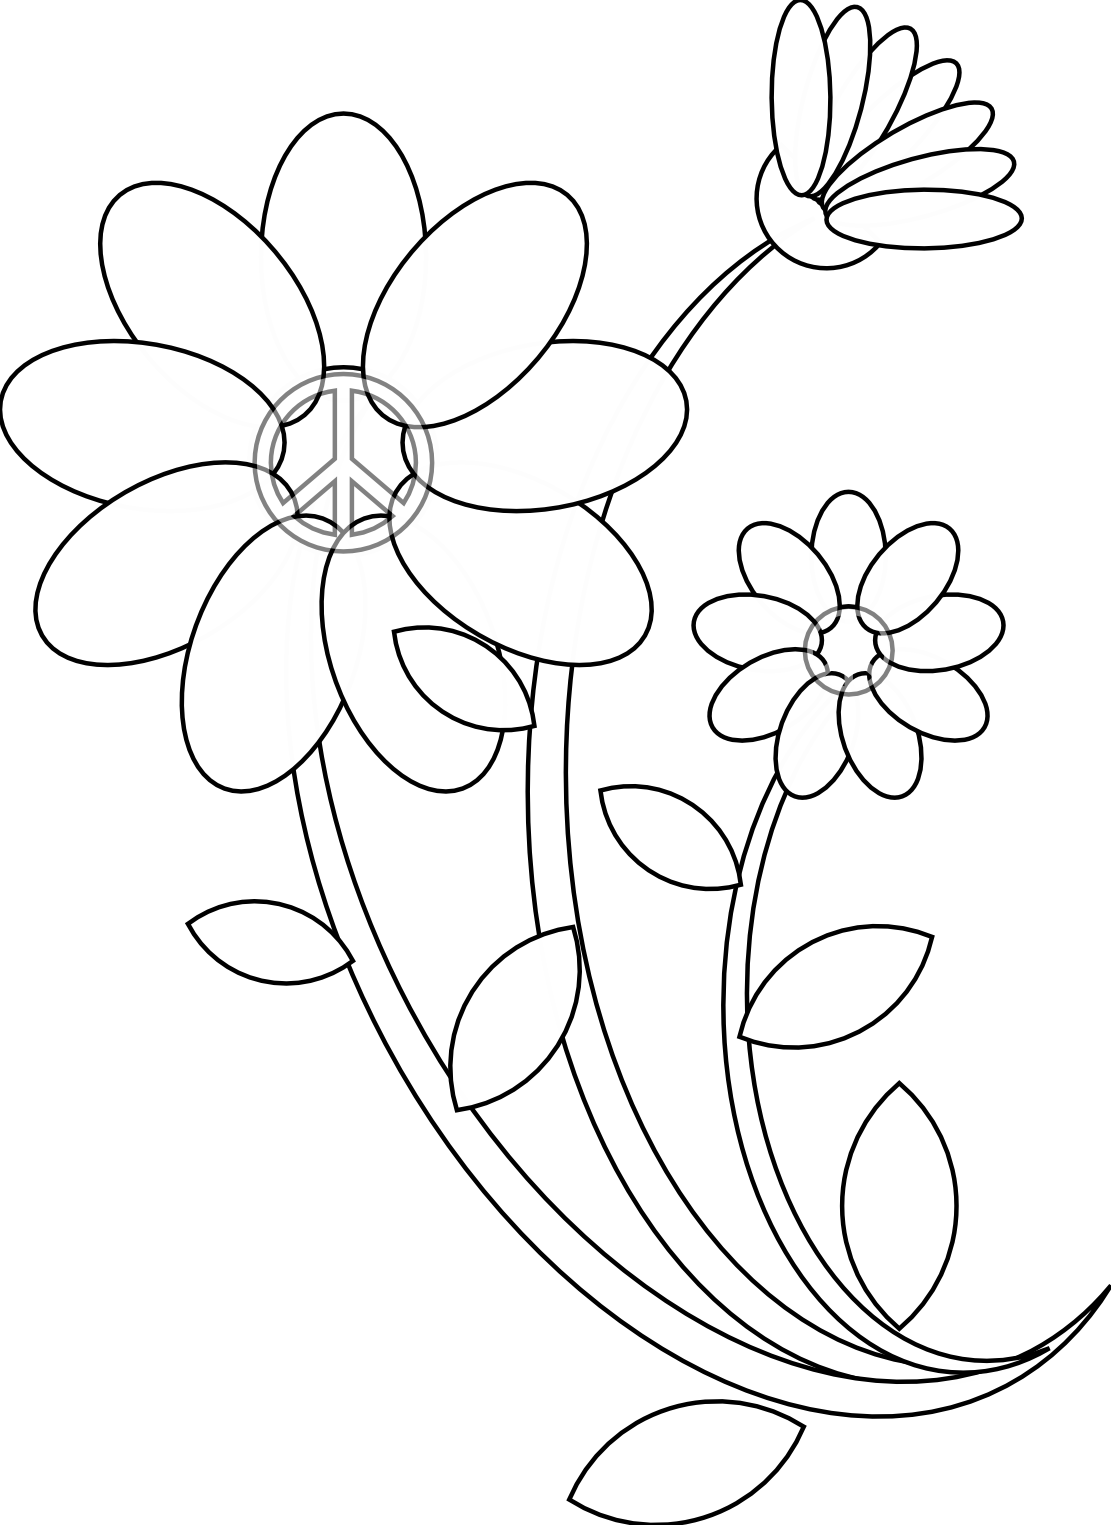 Free Line Drawing Of A Flower, Download Free Clip Art, Free Clip Art on